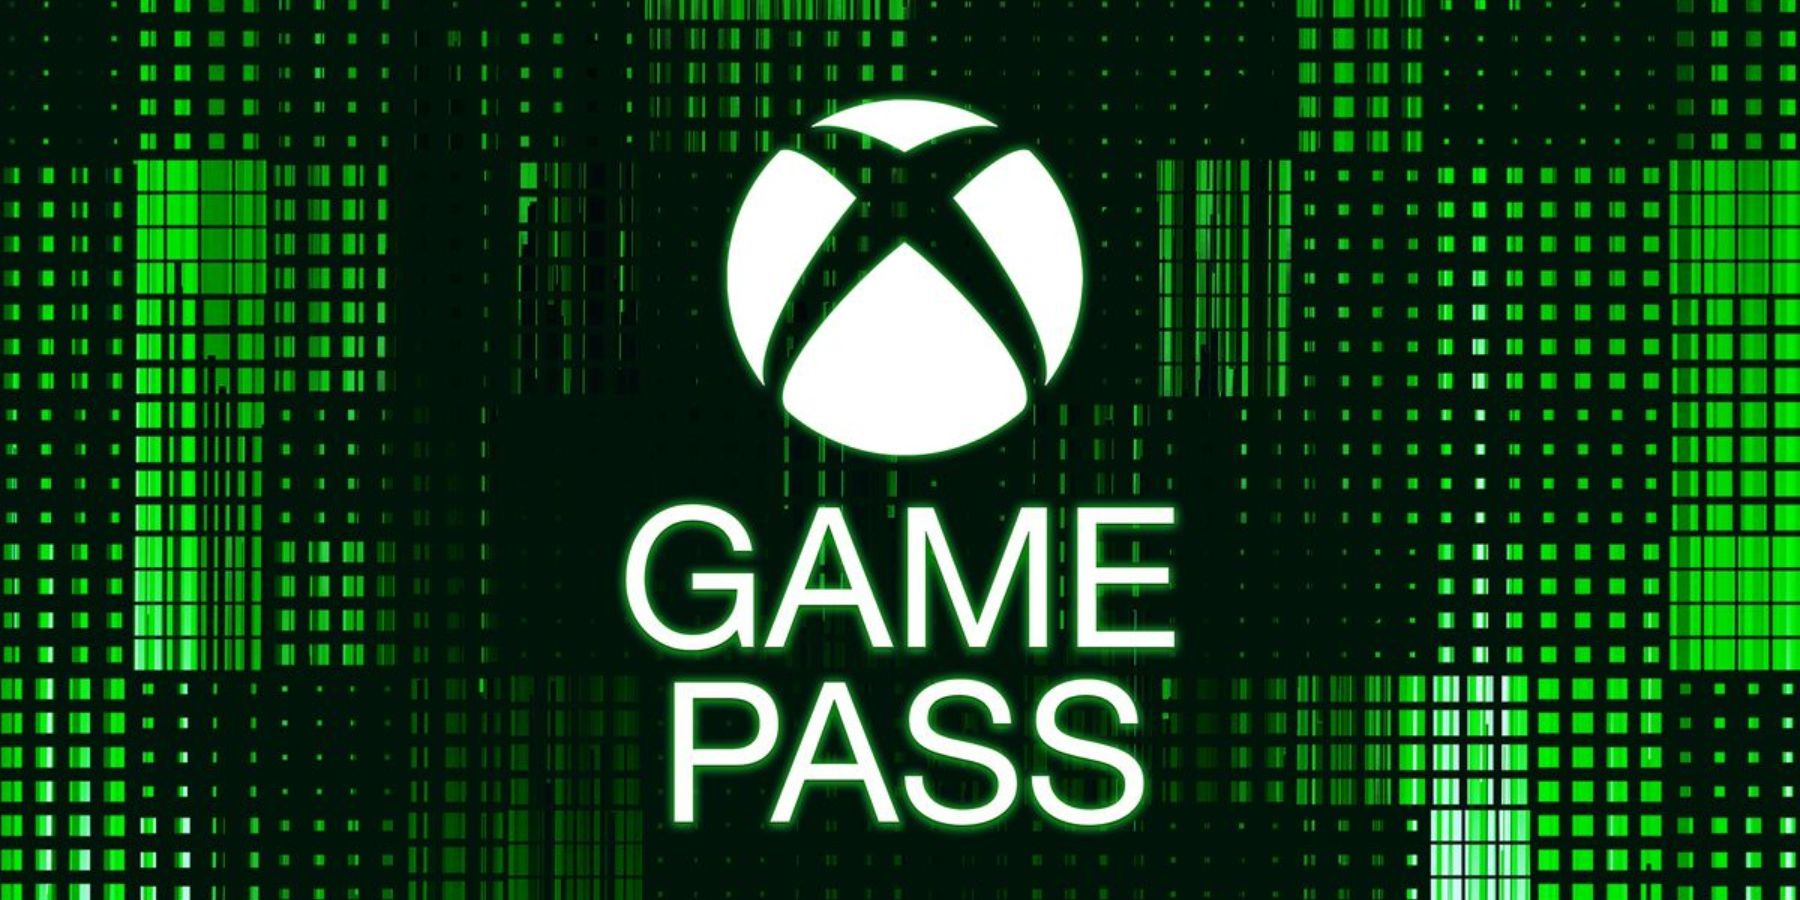 Persona 5 Tactica, Dune: Spice Wars, And More Hit Xbox Game Pass